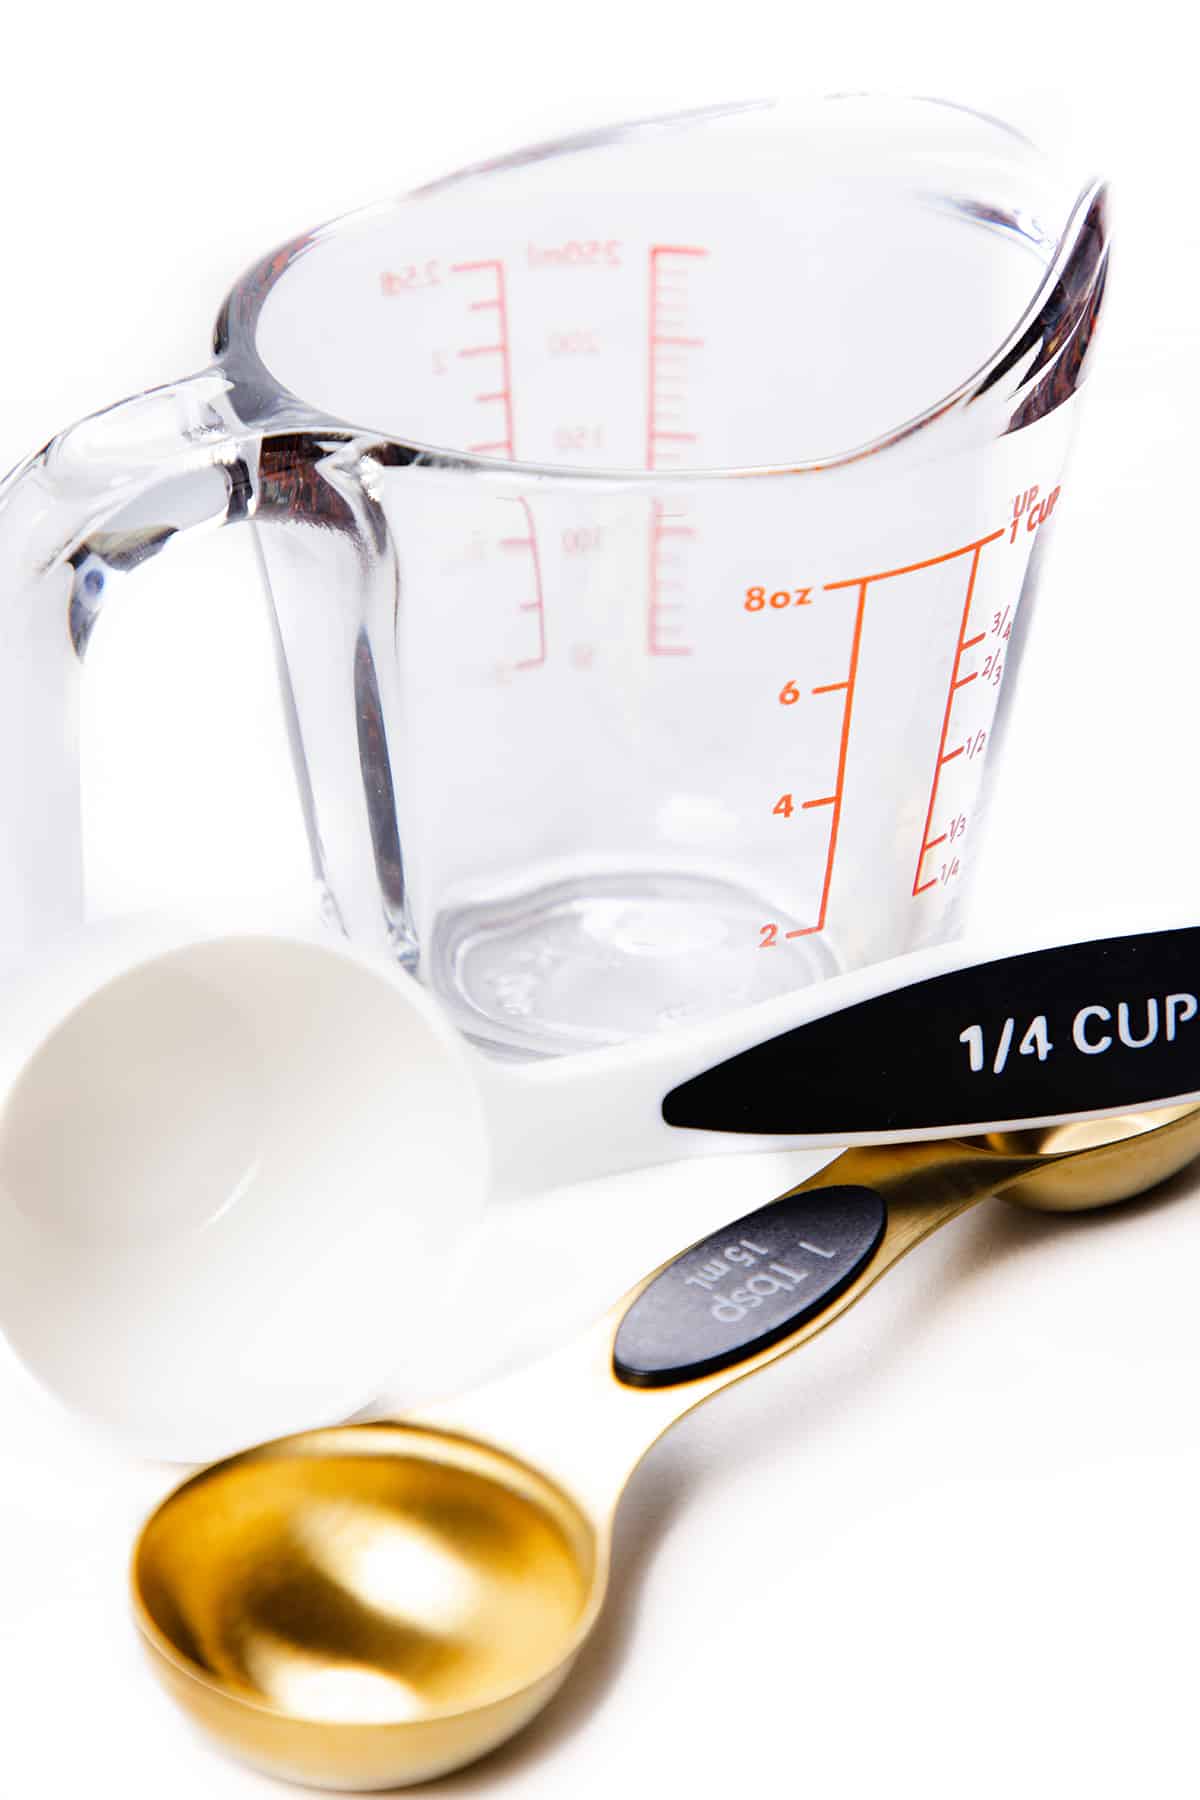 Measuring cup or scale? It depends